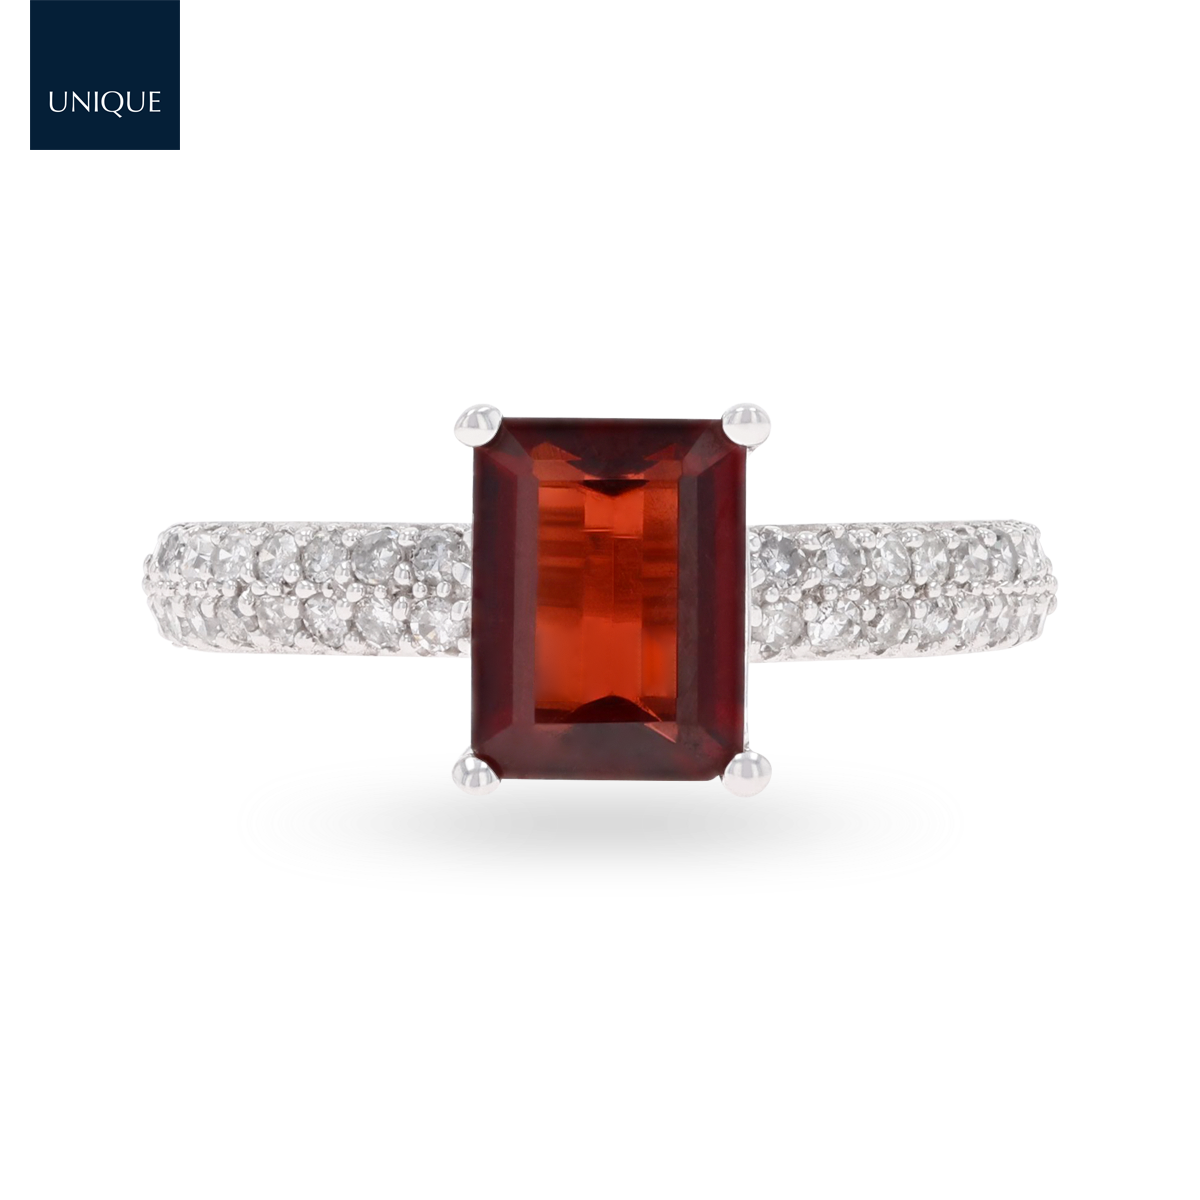 9ct White Gold Emerald Cut Garnet Solitaire Ring With Diamond Shoulders